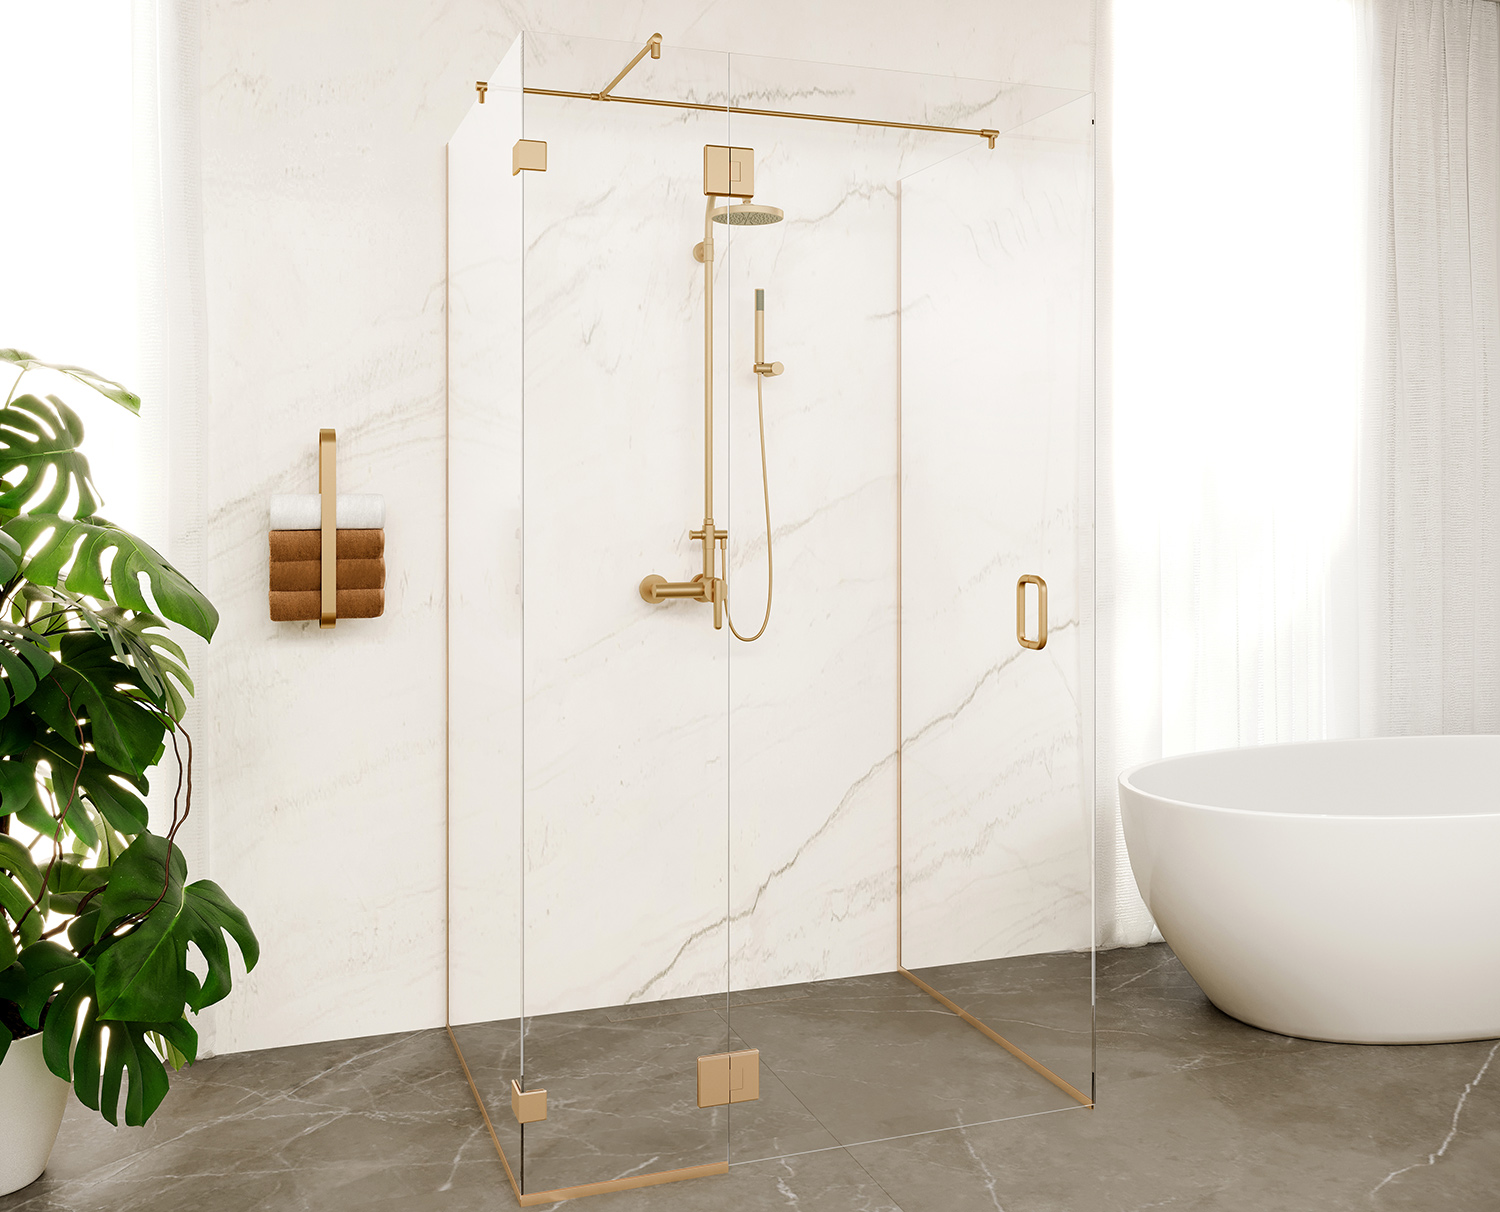 Four style tips for satin brass in the bathroom